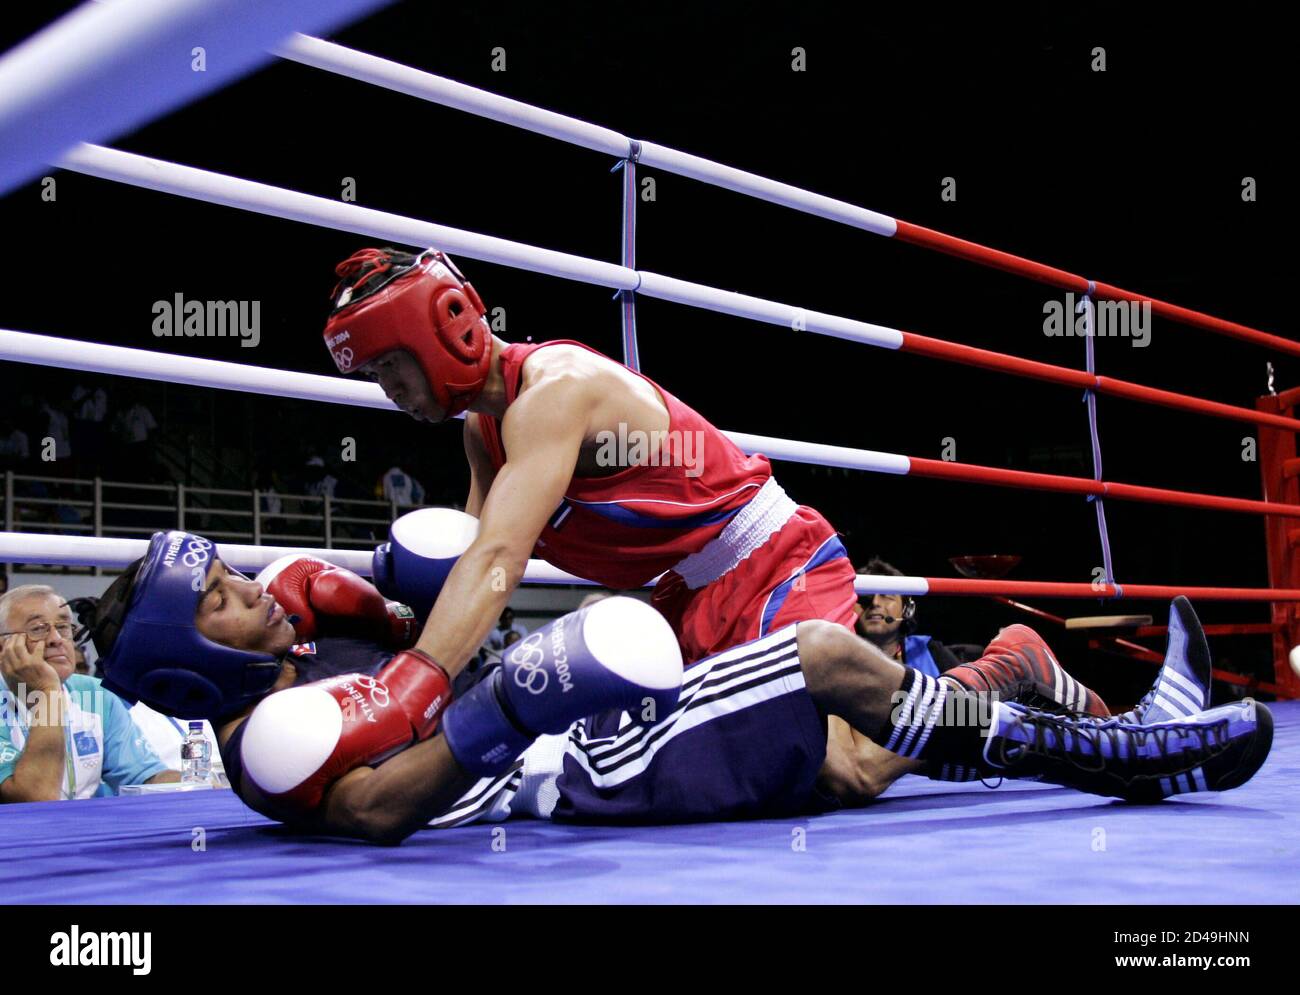 Cuba's Yuriorkis Gamboa Toledano (L) fights on the canvas Thailand's Somjit Jongjohor in their men's flyweight (51kg) round of 16 bout at the Athens 2004 Olympic Summer Games August 21, 2004. Gamboa Toledano won the bout. Stock Photo